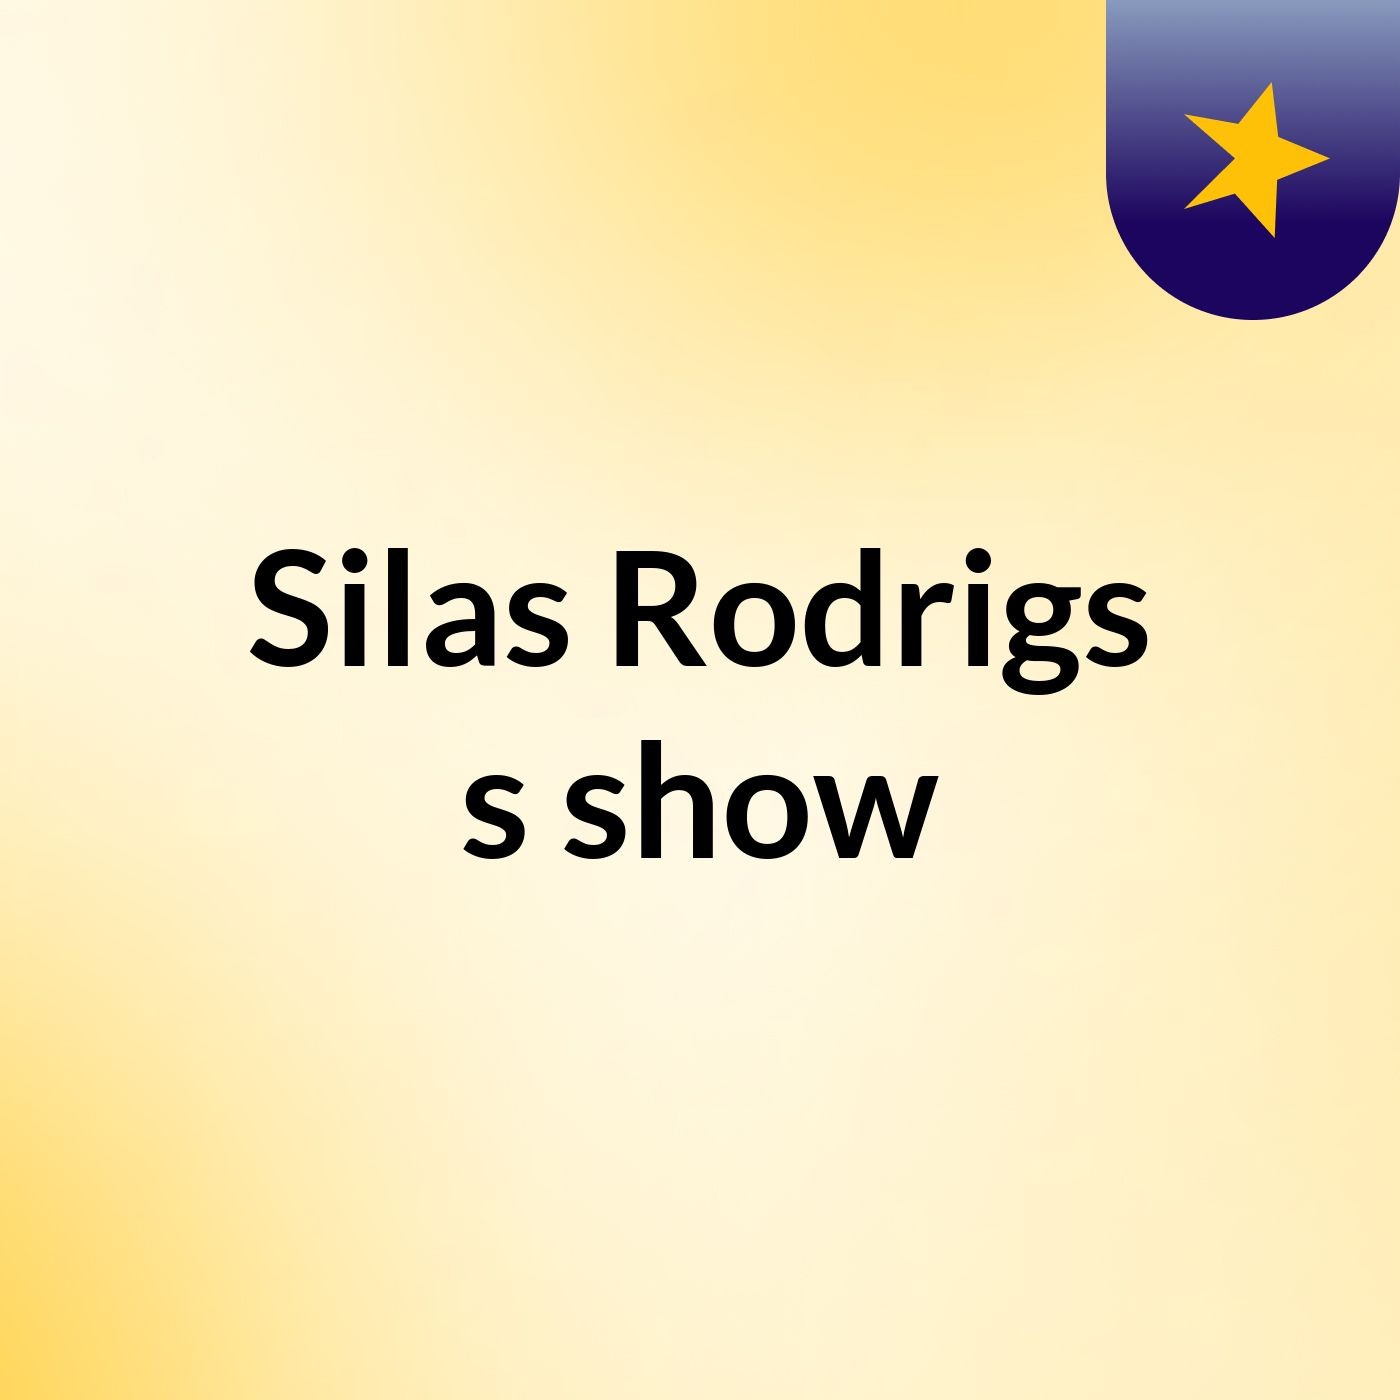 Silas Rodrigs's show